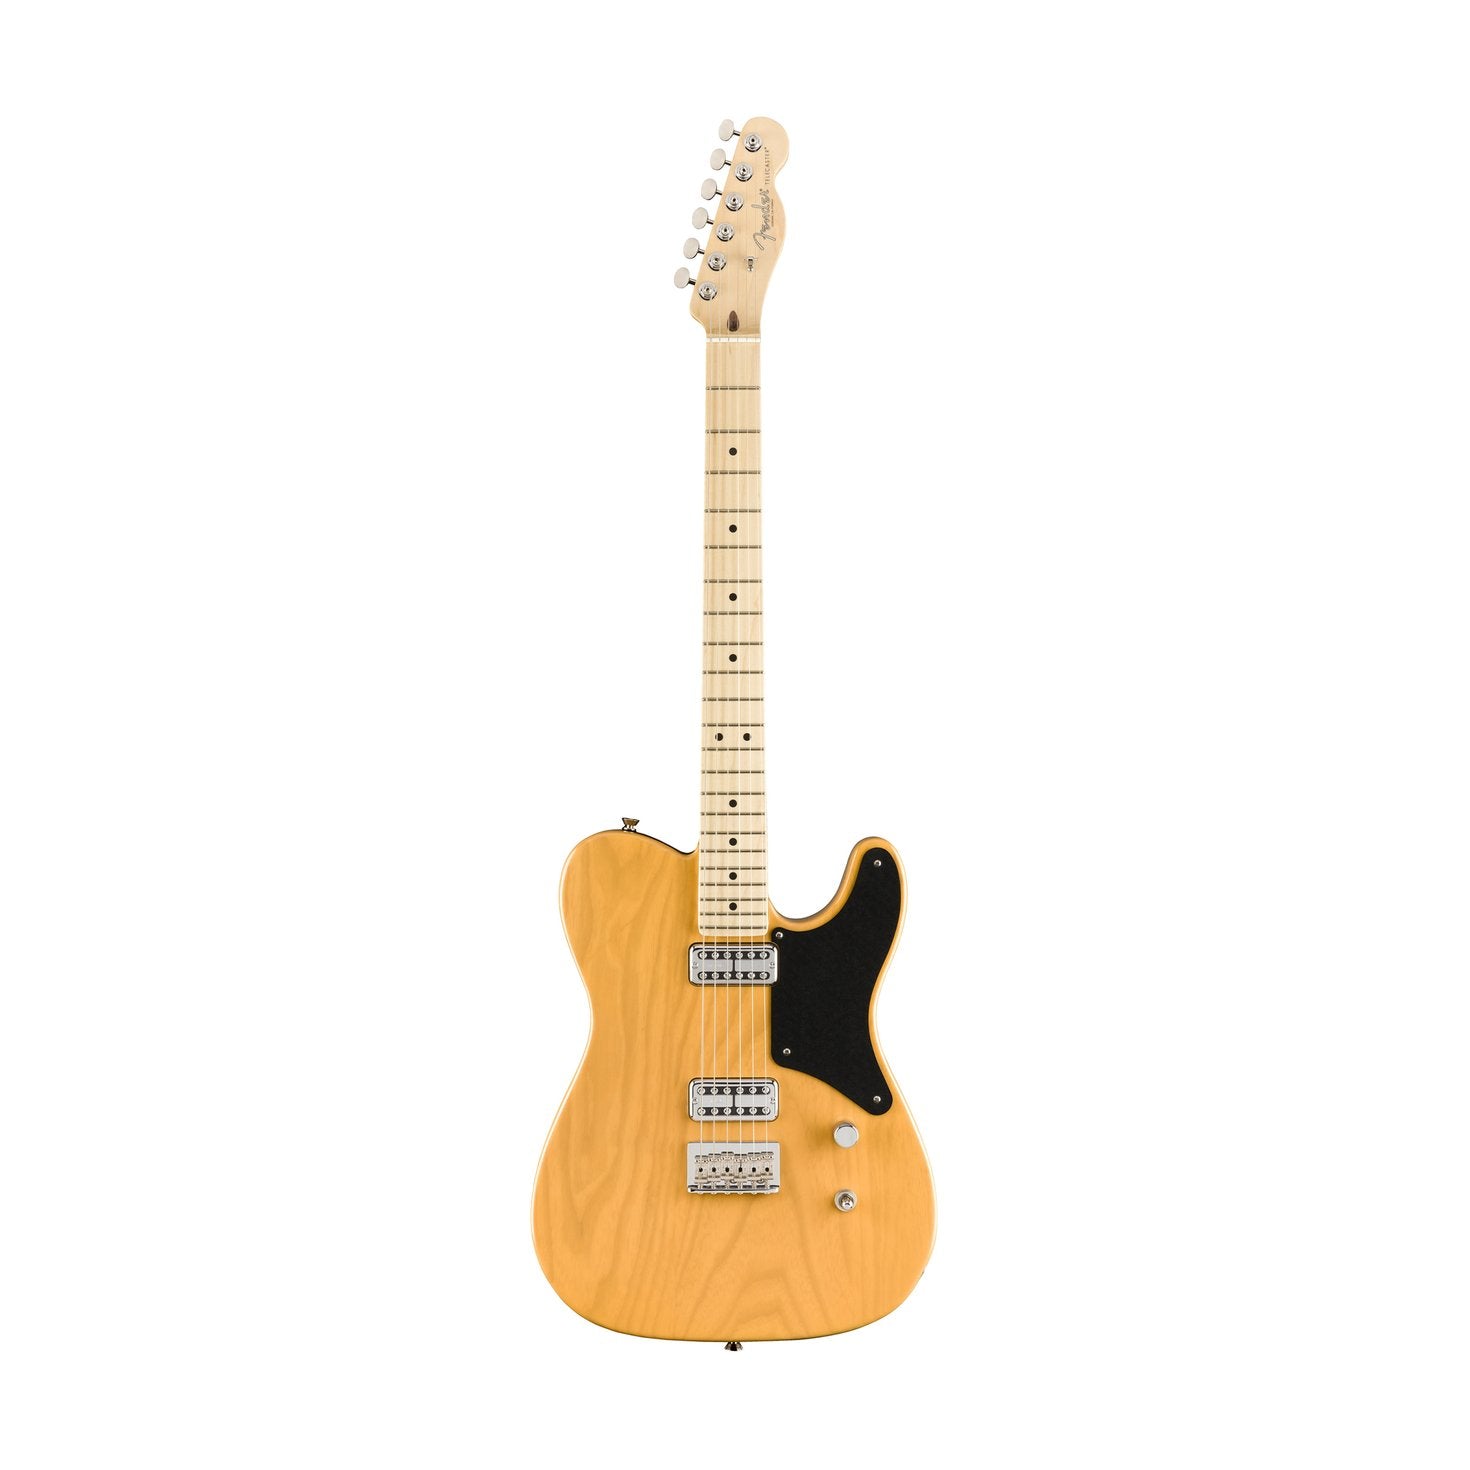 Fender Limited Edition Cabornita Telecaster Electric Guitar, Maple FB, Butterscotch Blonde, FENDER, ELECTRIC GUITAR, fender-electric-guitar-f03-017-0148-750, ZOSO MUSIC SDN BHD